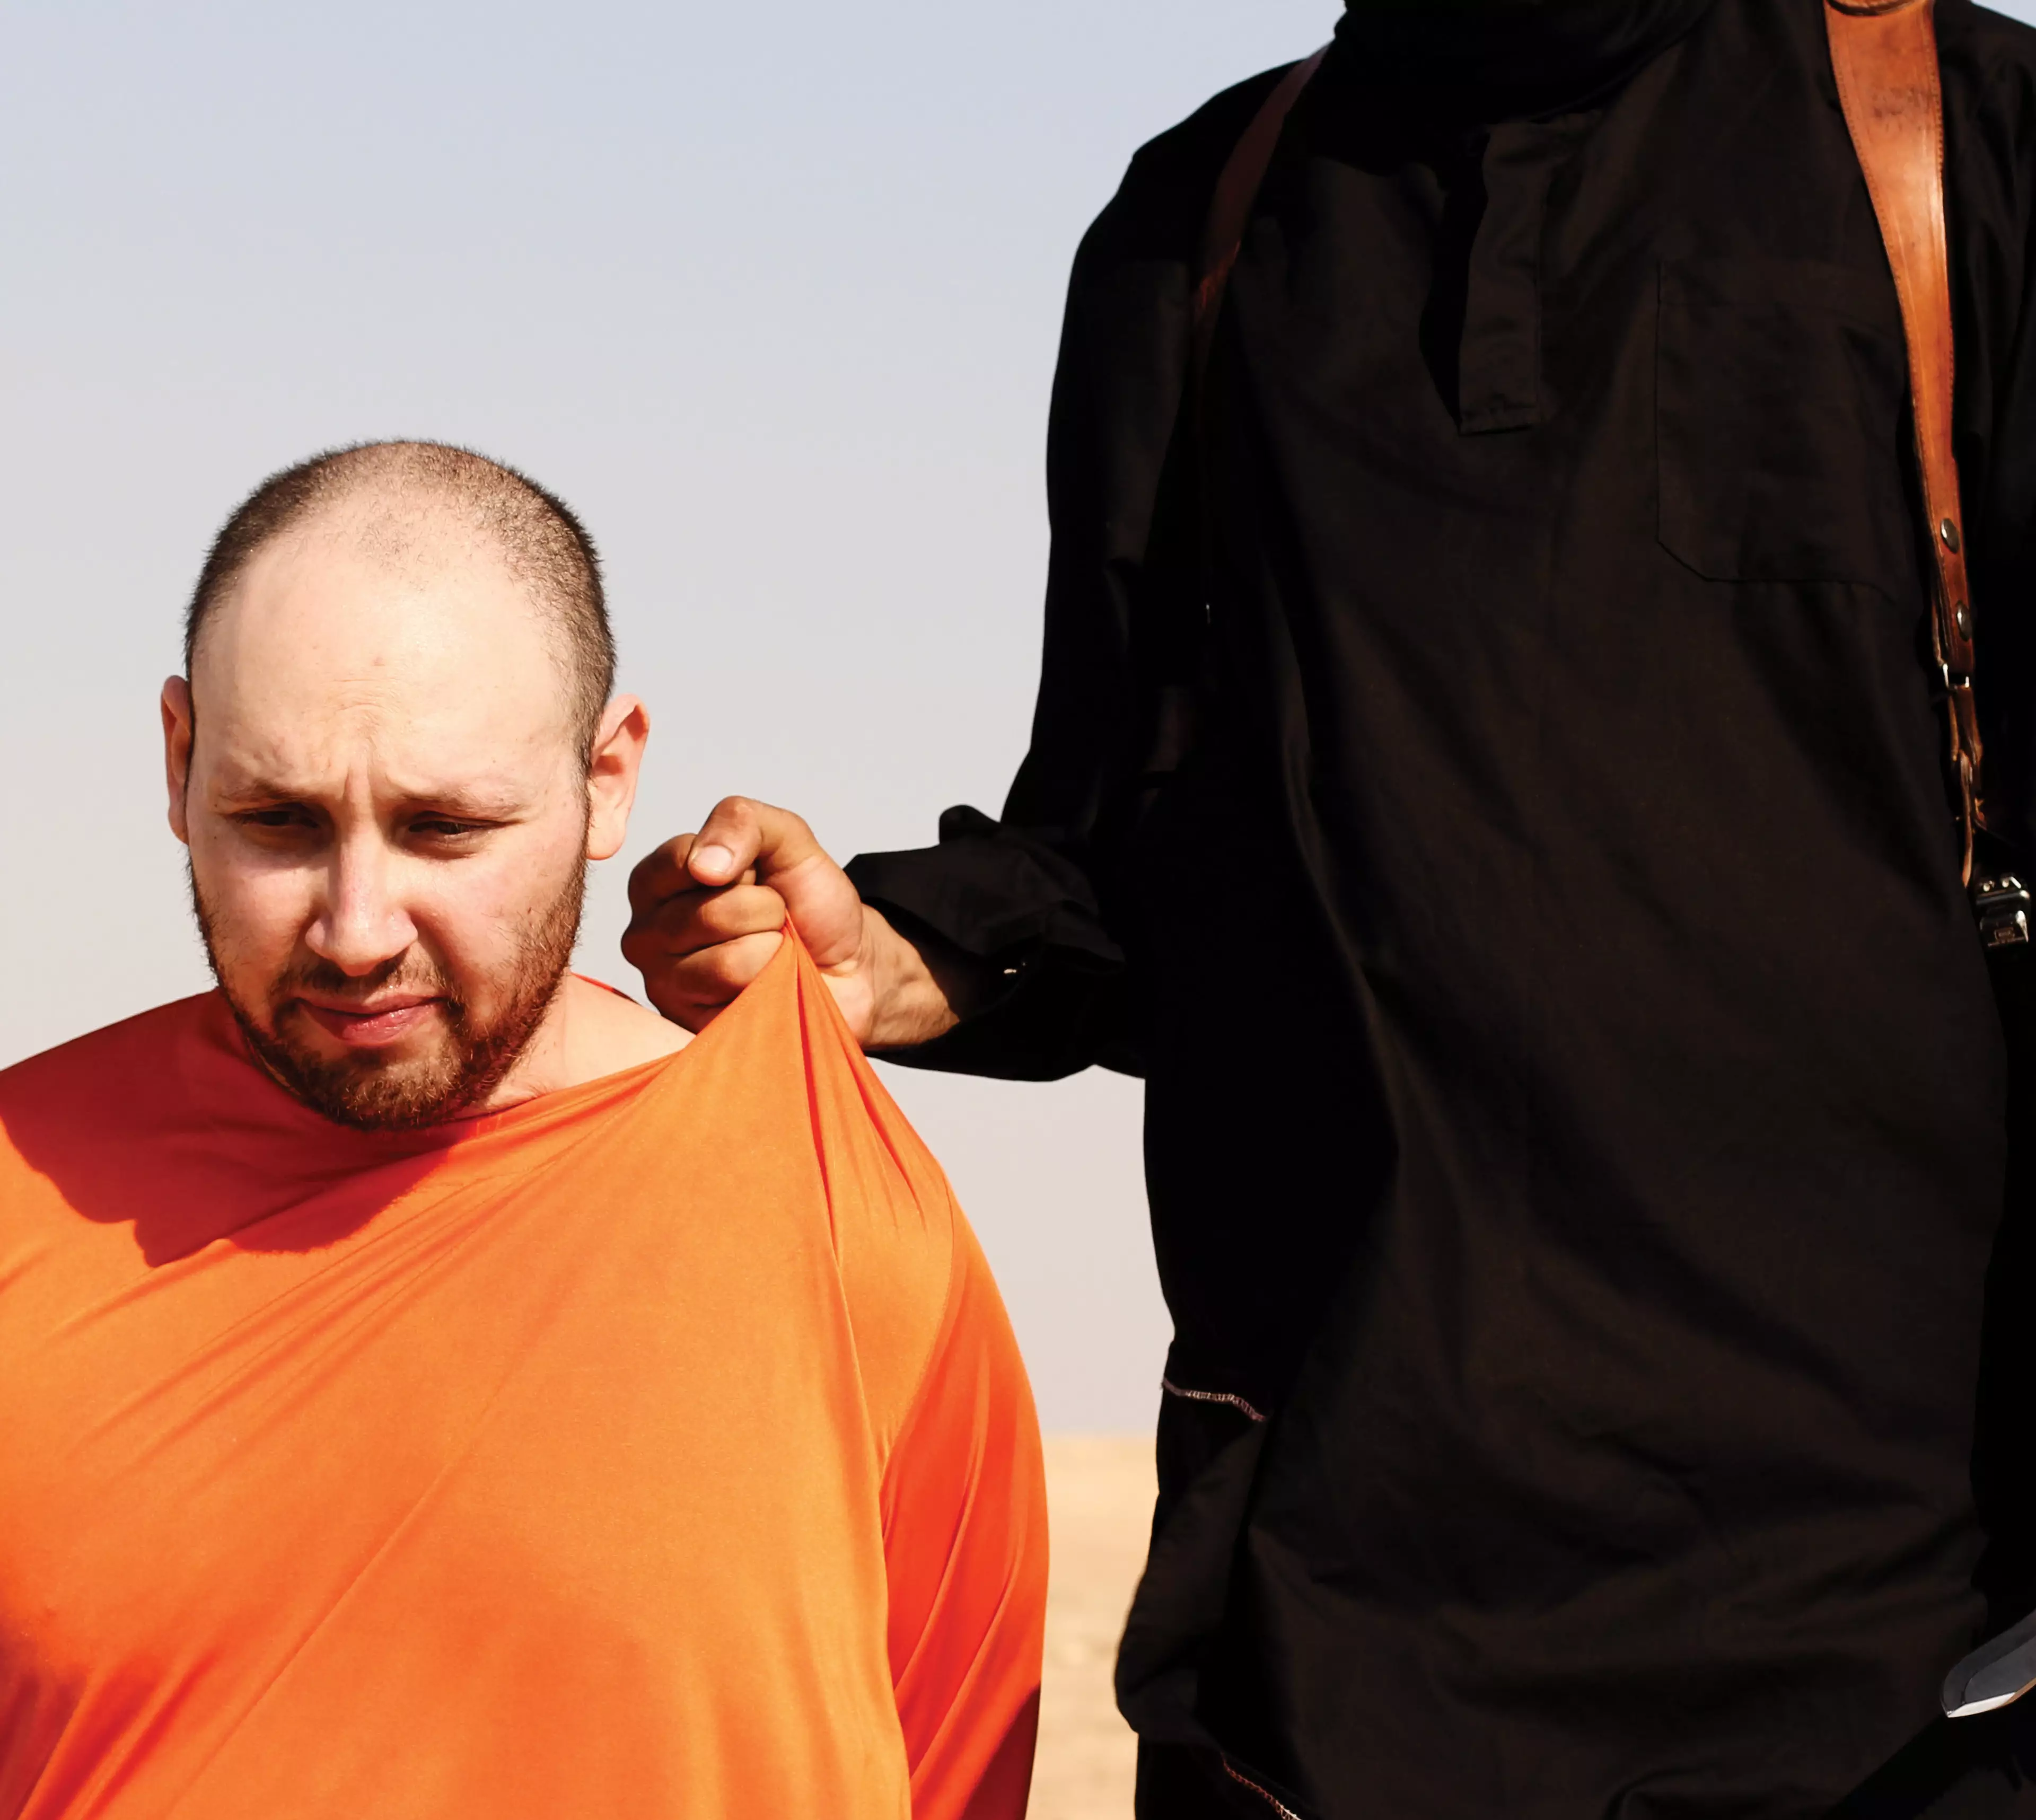 Islamic State of Iraq and the Levant propaganda photo showing the execution of American journalist Steven Sotloff by masked ISIS militant Jihadi John in September 2014 (